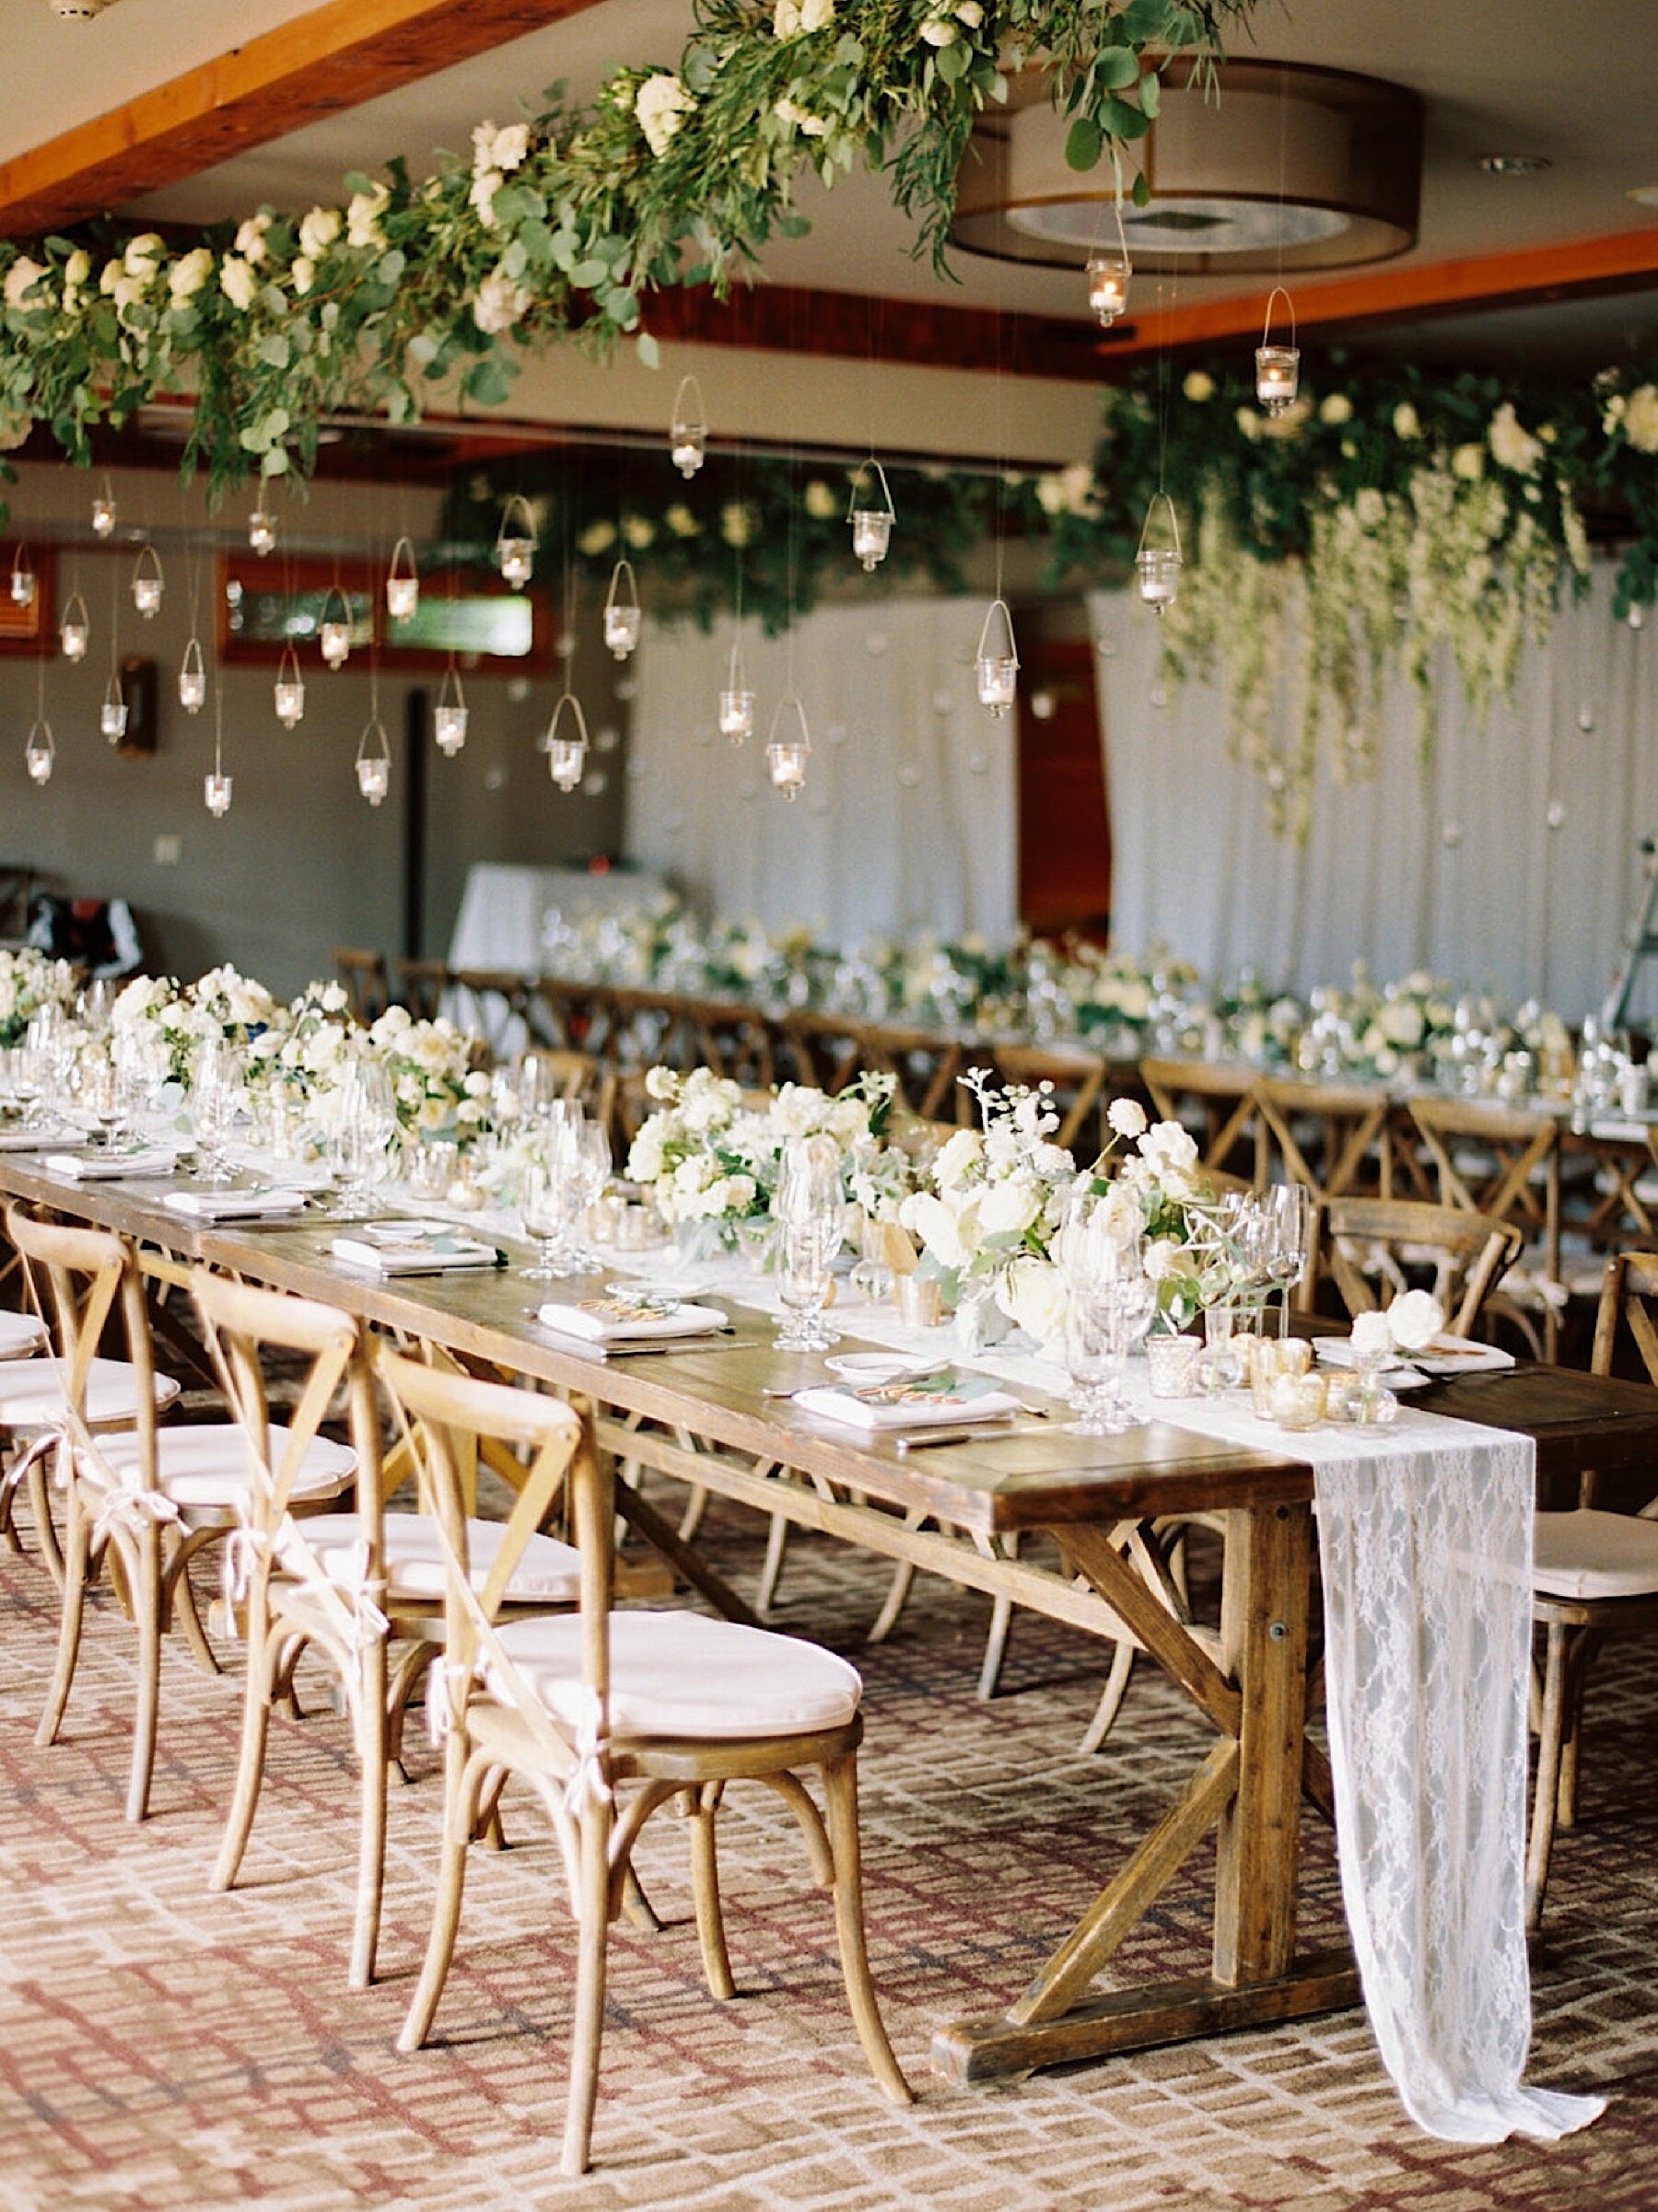 01_wedding_White_luxury_Lodge_green_Company_by_at_Design_and_florist_Seattle_Gather_Willows_top.jpg